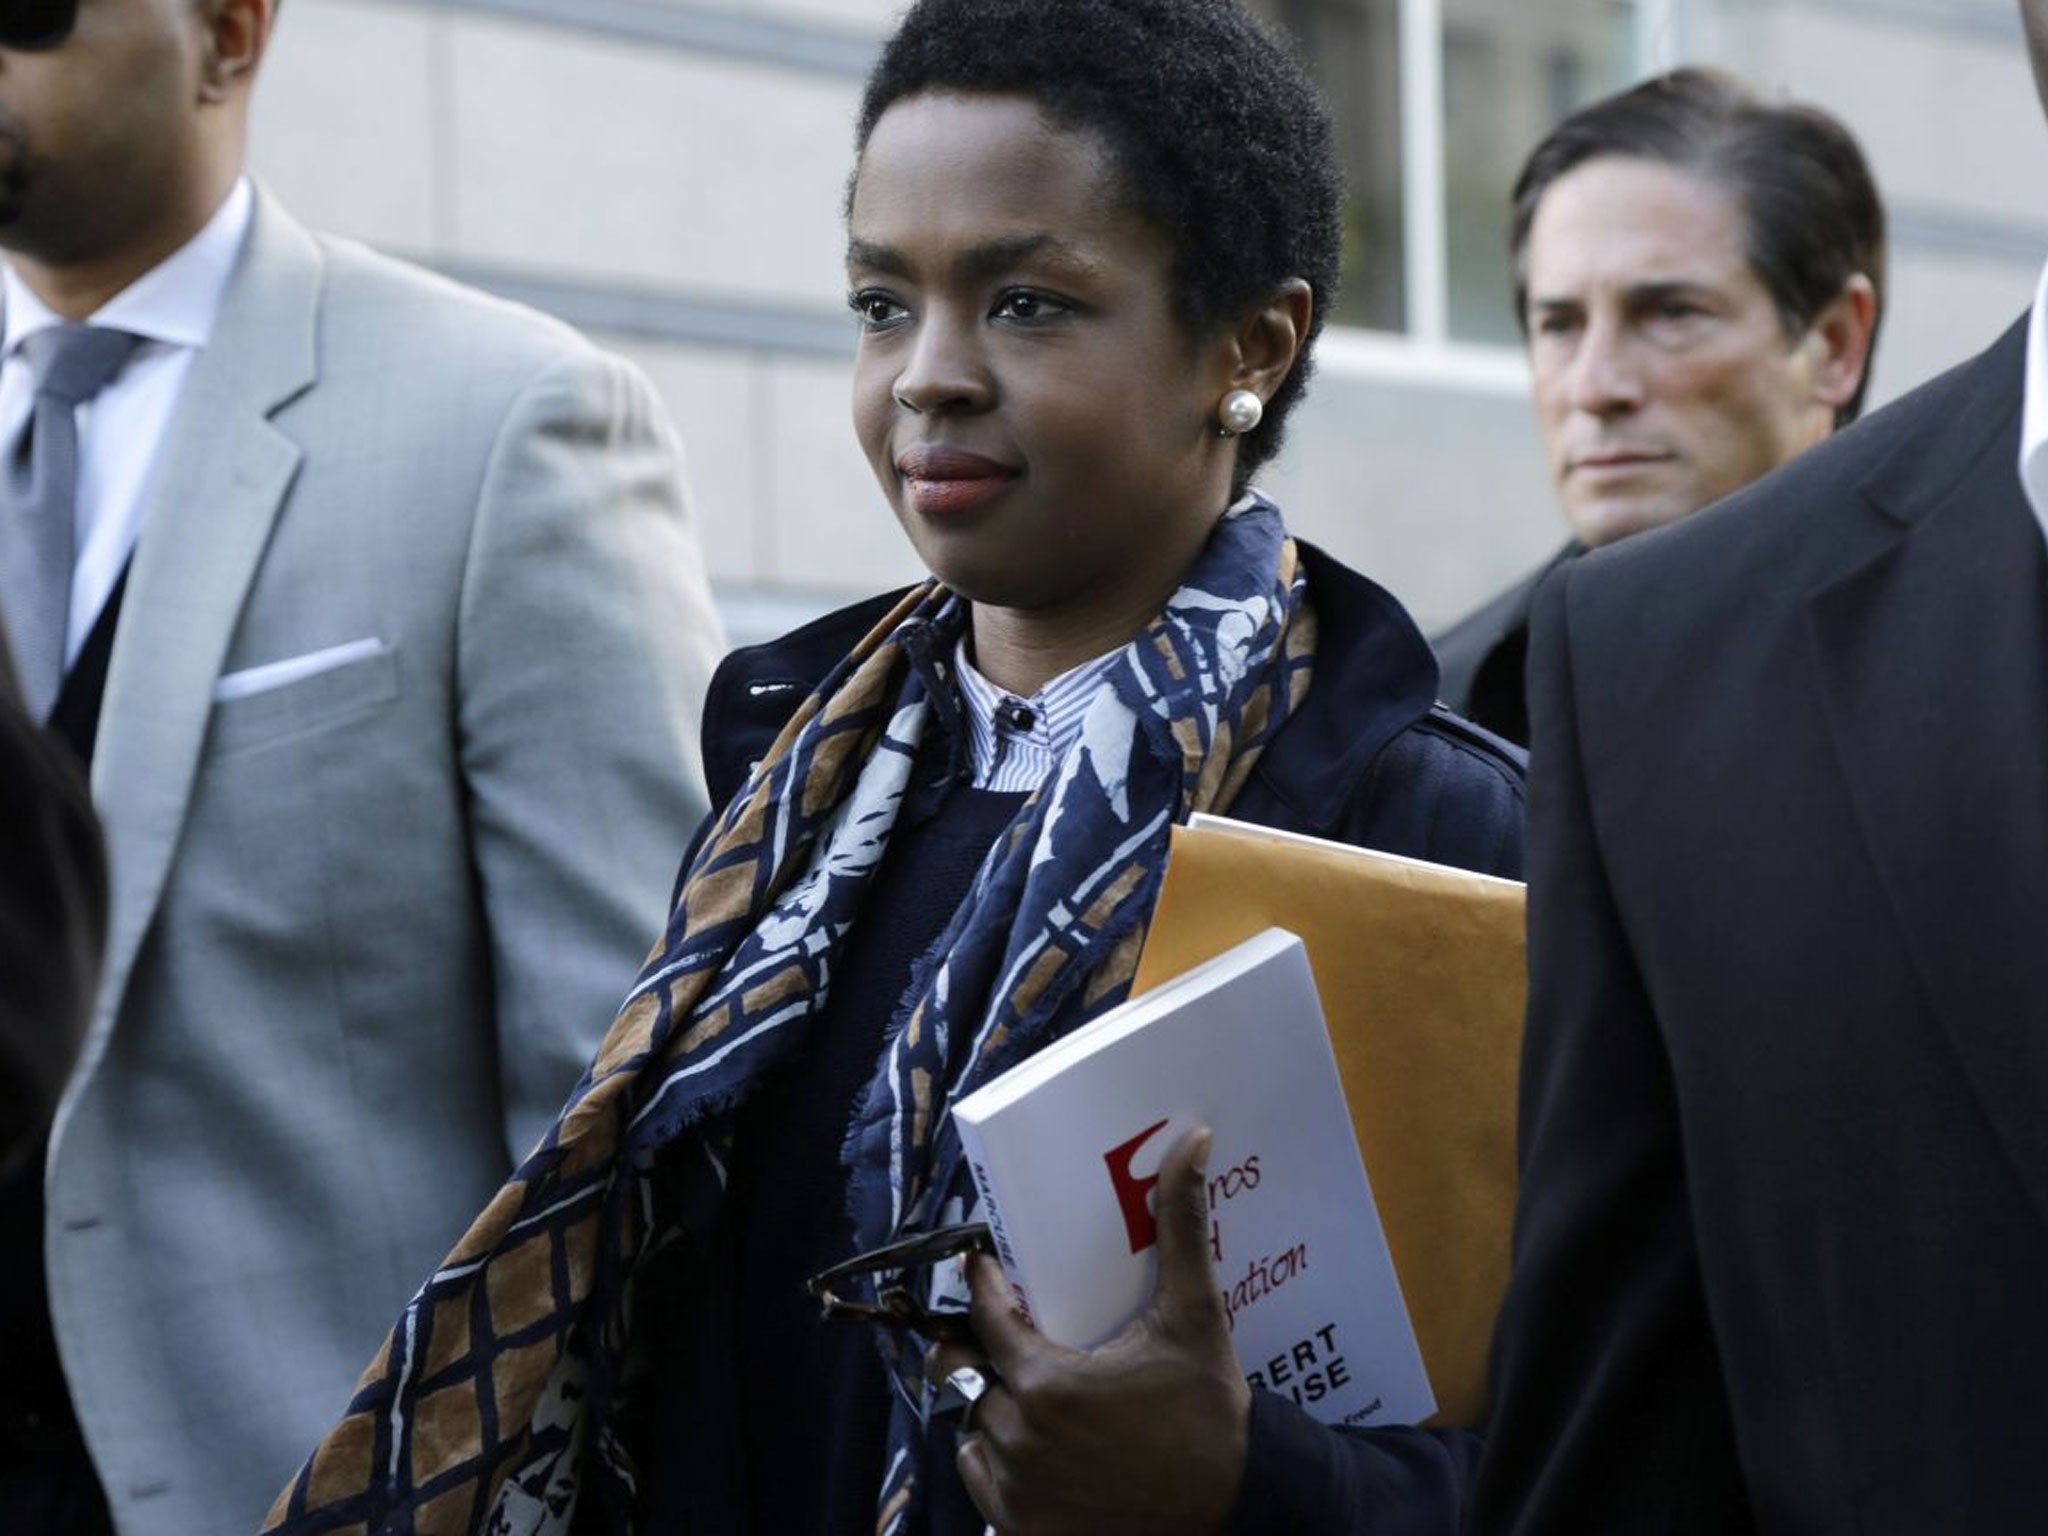 Eight-time Grammy Award winning singer Lauryn Hill leaves federal court in Newark, after sentencing in her tax evasion case. Hill was sentenced to three months in prison and an additional three months in home confinement for failing to pay taxes on about